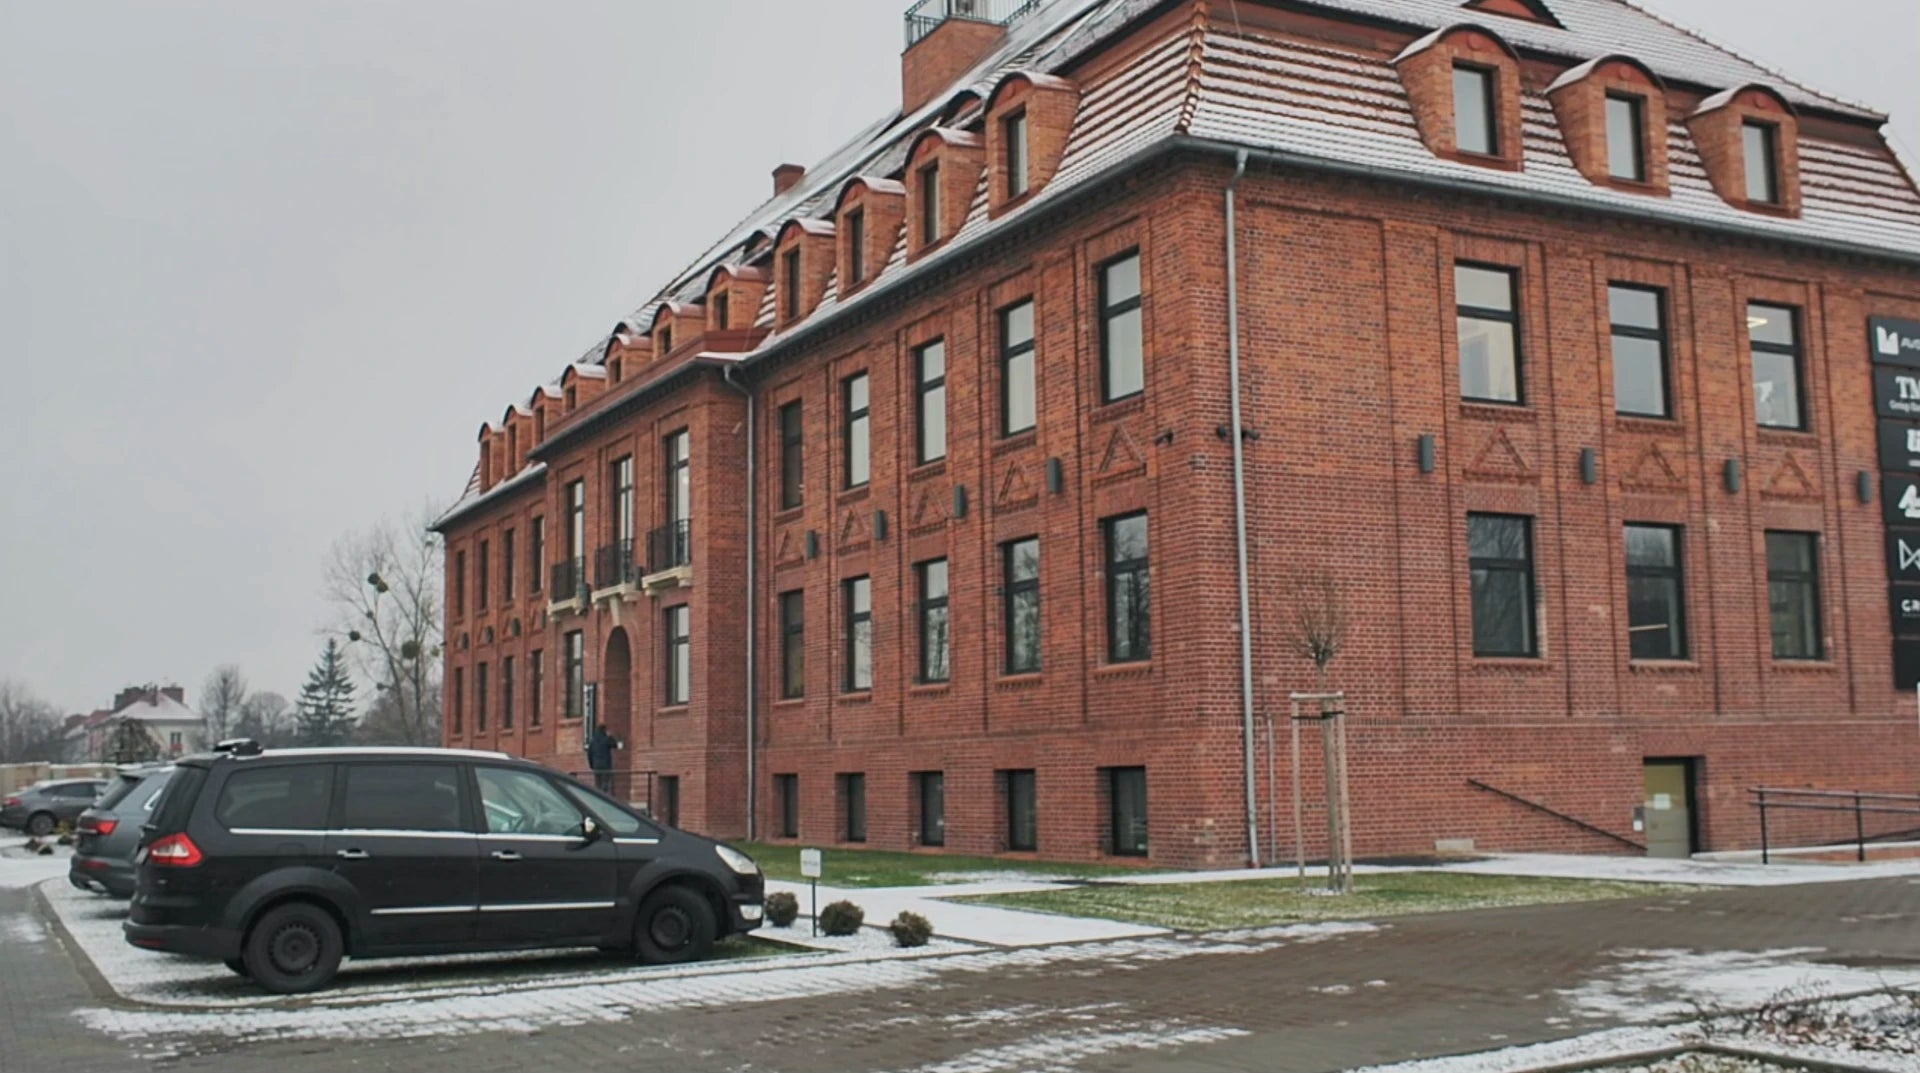 A red brick factory building with a sloped roof and multiple dormer windows, located in a snowy setting. There is a parking lot in front with a few cars, most prominently a black minivan. The sky is overcast, suggesting a cold day.